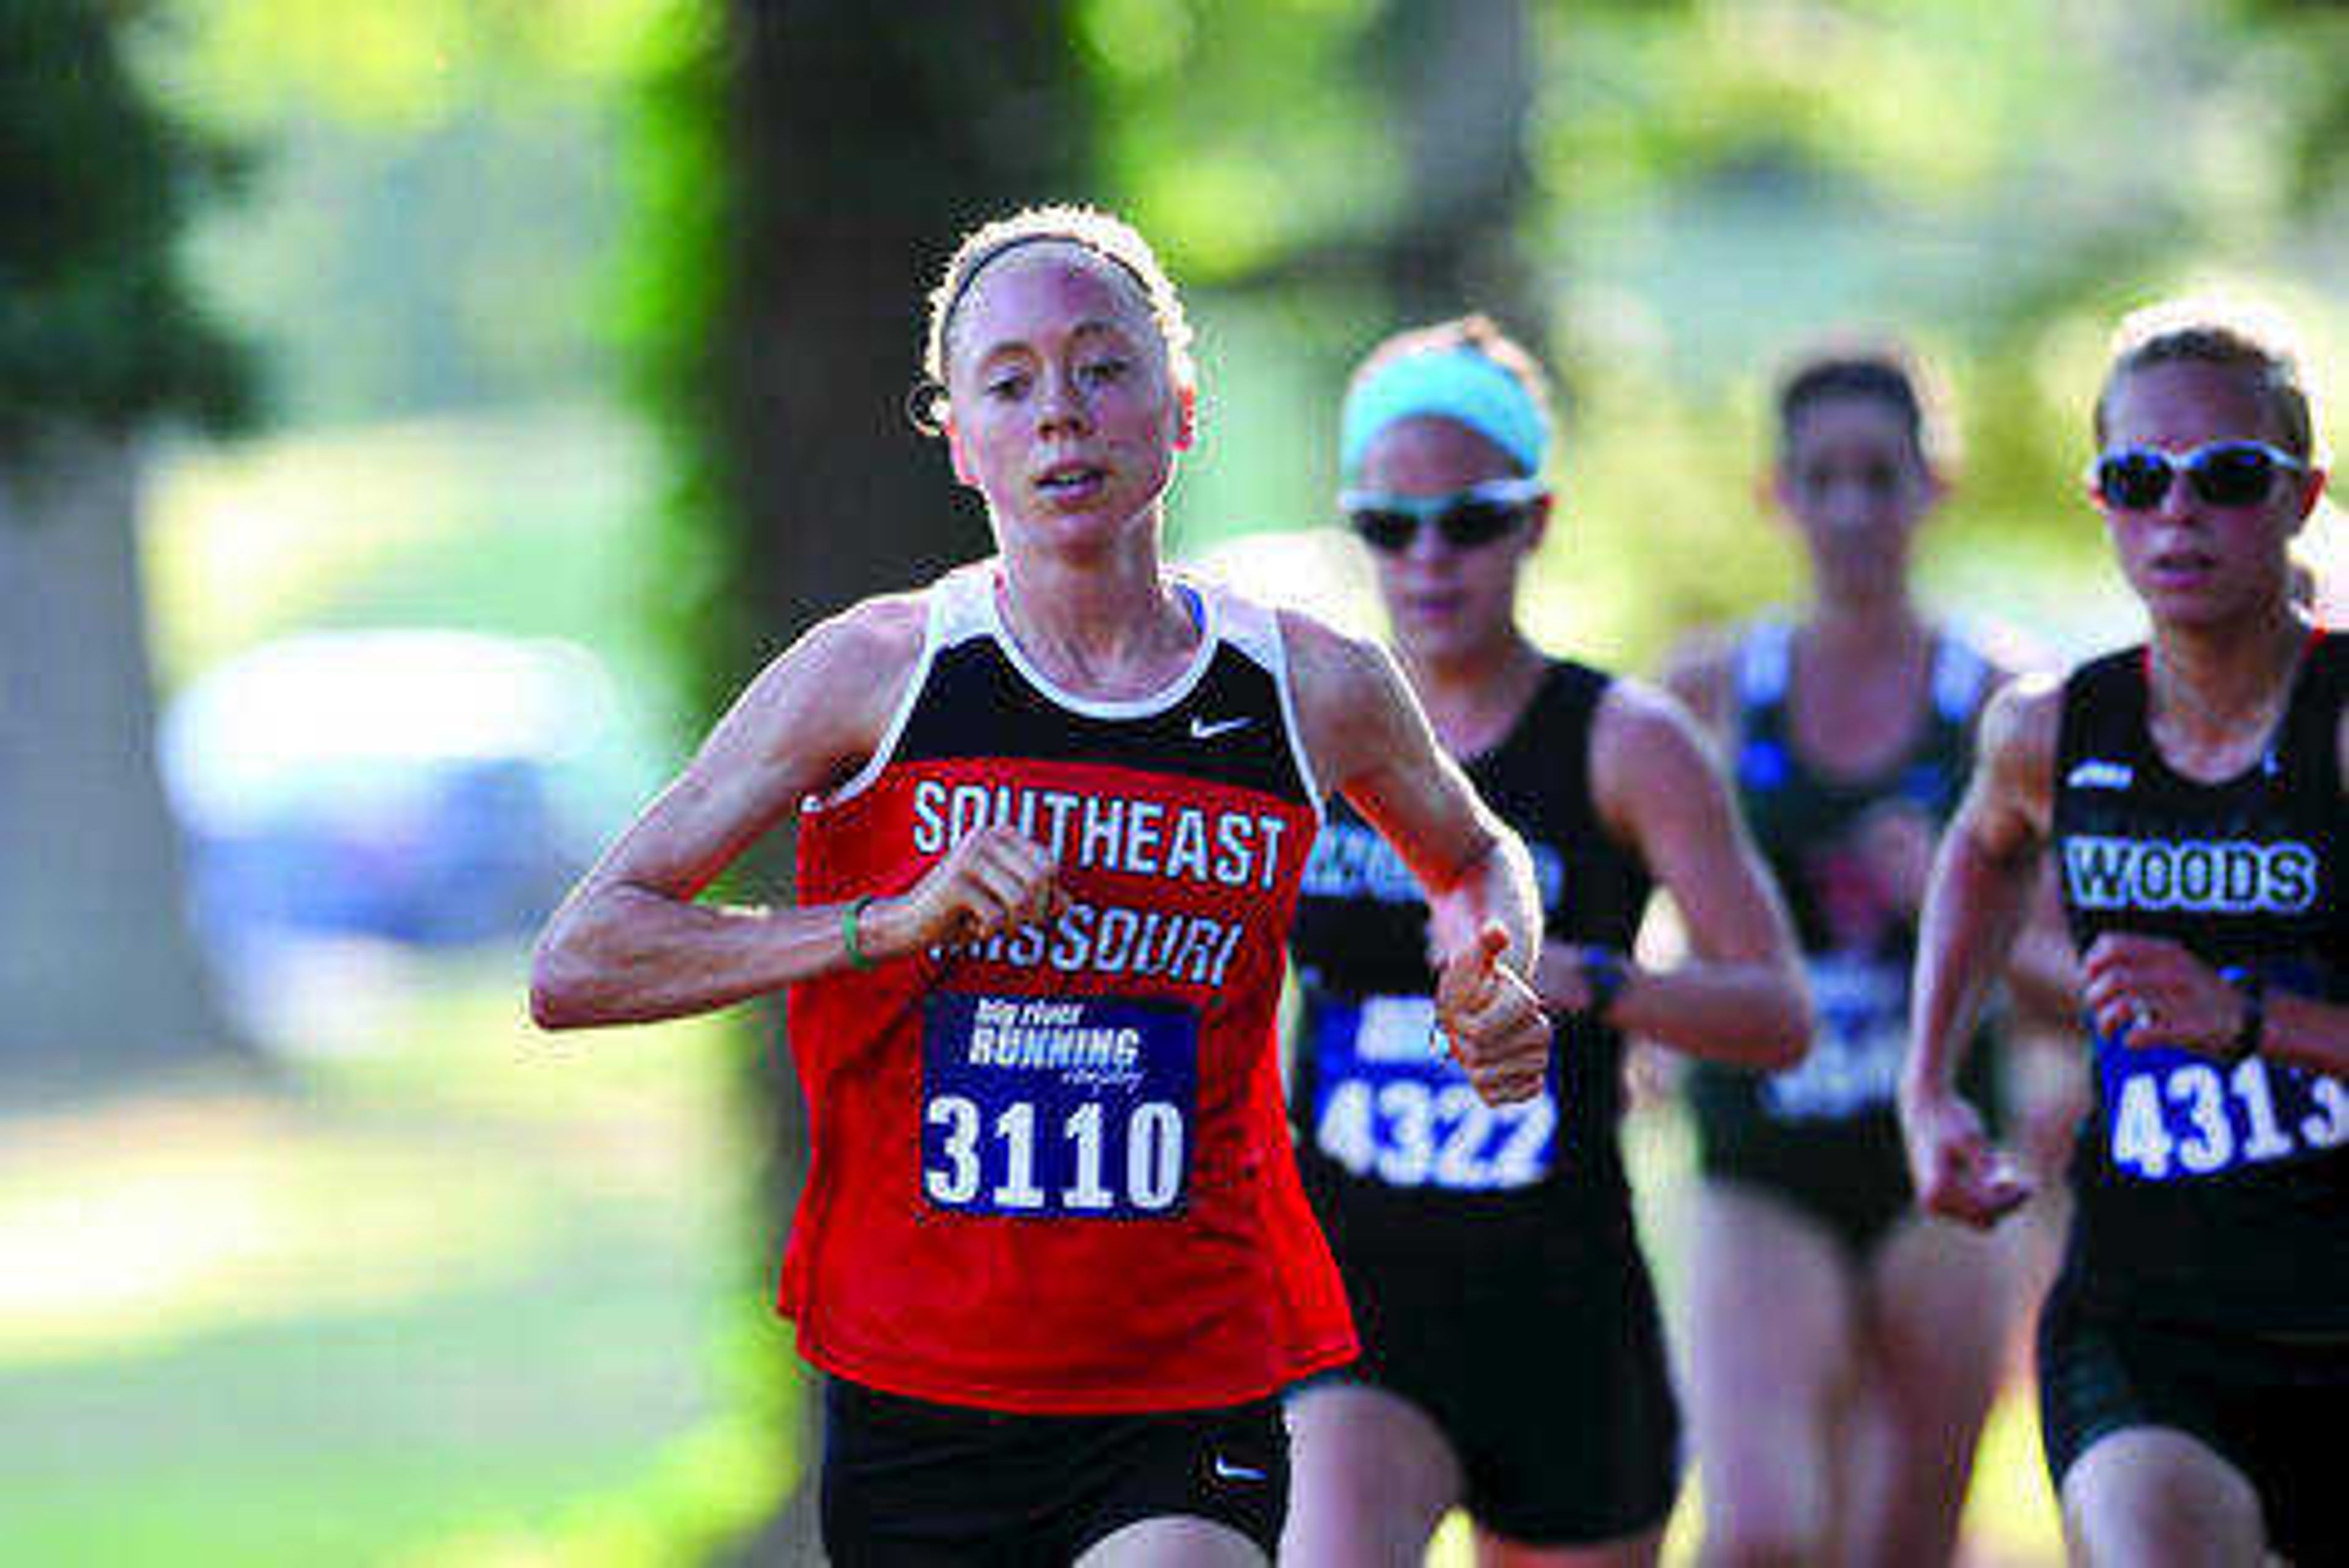 Rebekah Lawson competing in last year's meet's. Submitted photo